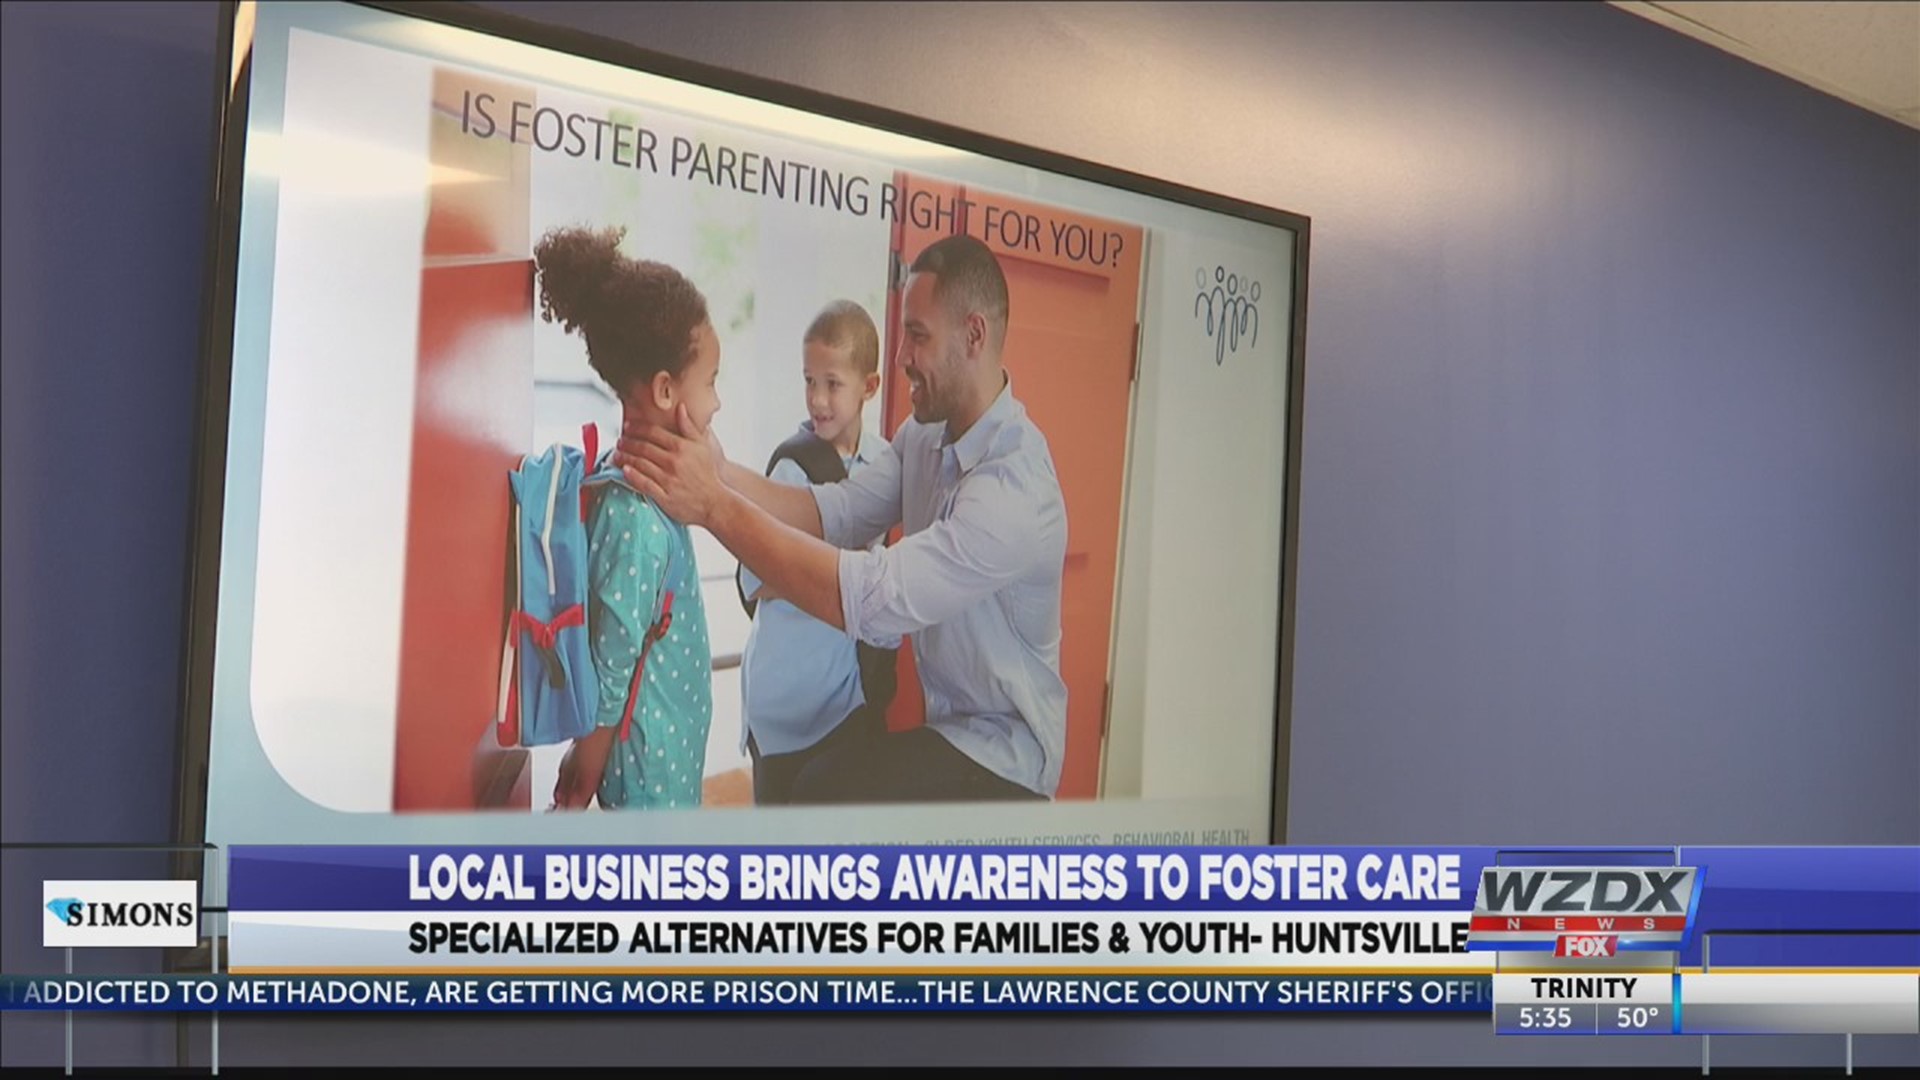 Specialized Alternatives for Families & Youth are working to bring awareness to the community about foster care.